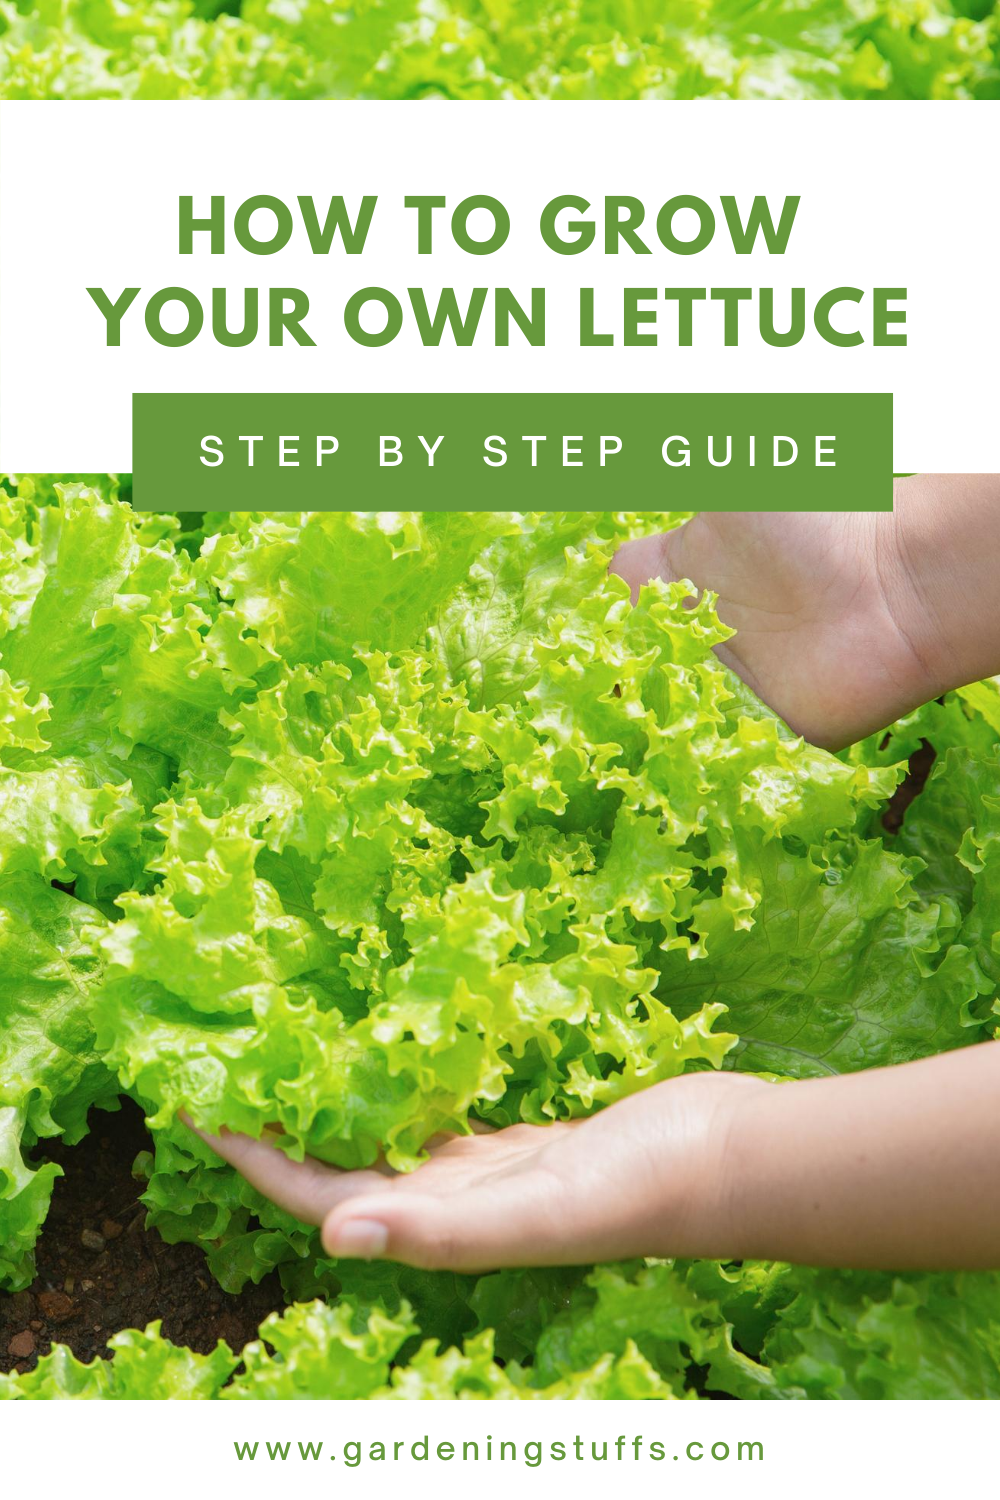 Growing Lettuce is easy and they don’t require a lot of specialized care so it’s a great starter for a vegetable garden. Read on to learn more about the different types of lettuce and how to grow them.